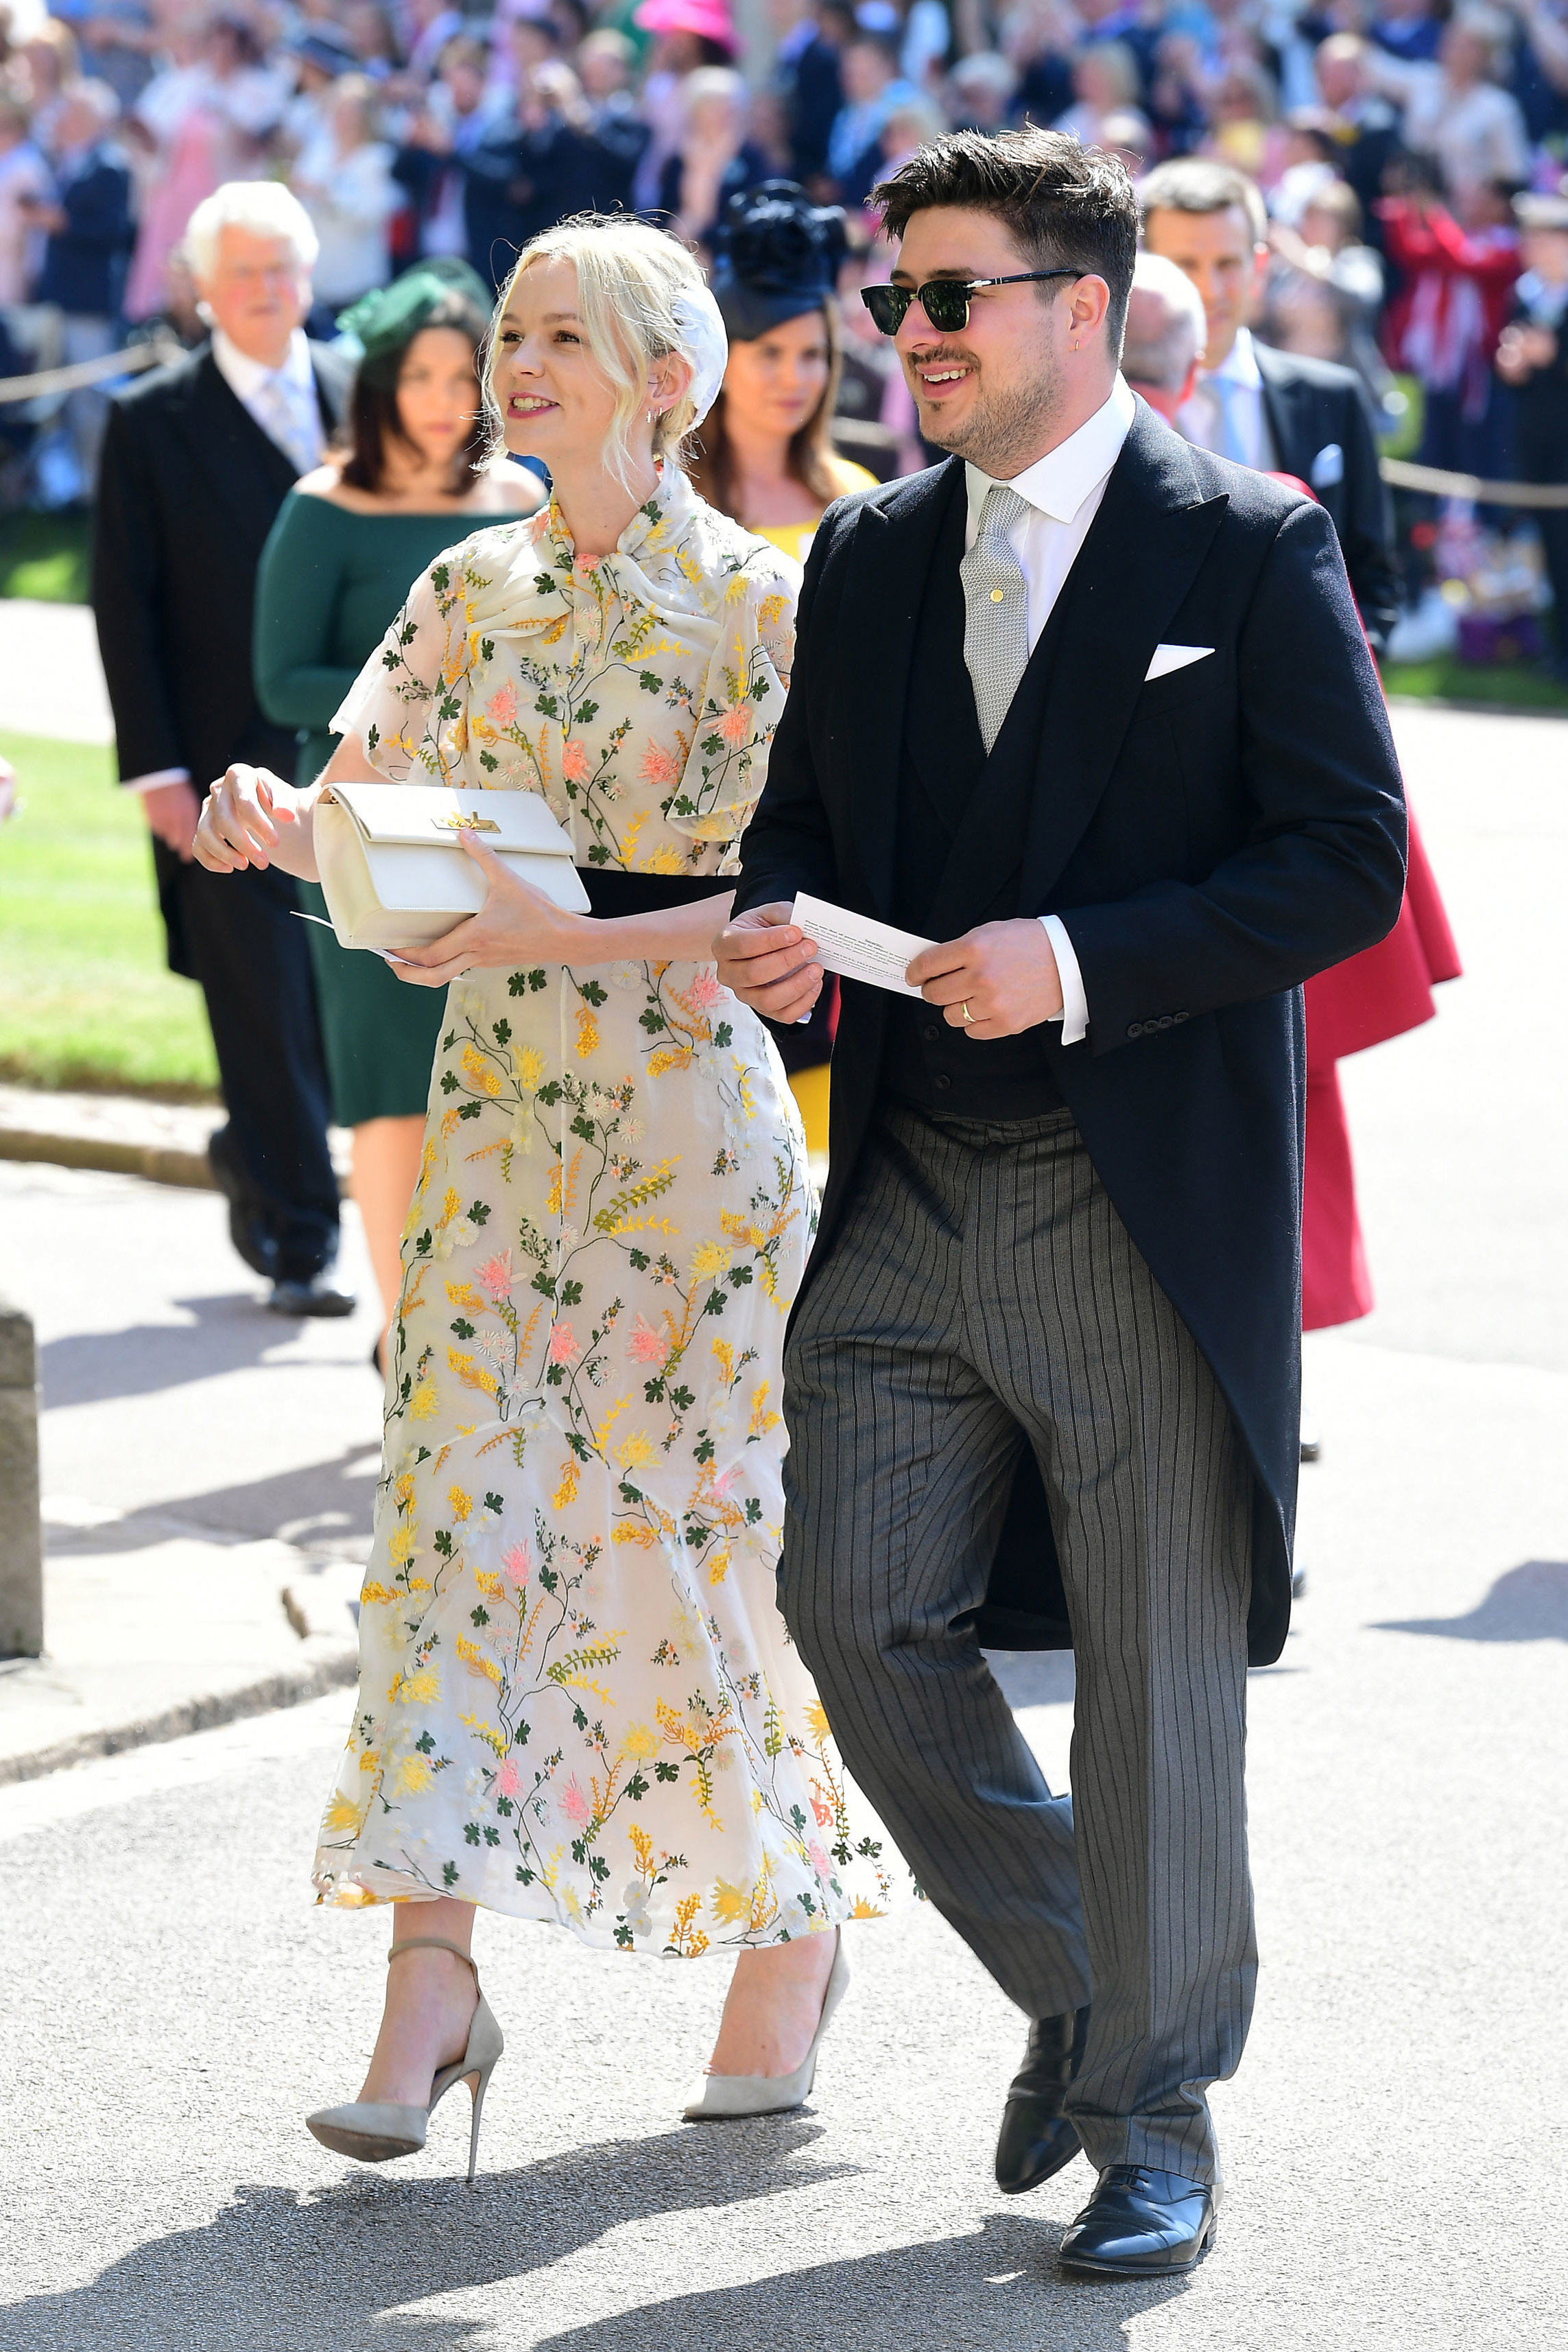 Marcus Mumford and Carey Mulligan arrive at St George's Chapel at Windsor Castle before the wedding of Prince Harry to Meghan Markle on May 19, 2018, in Windsor, England | Source: Getty Images